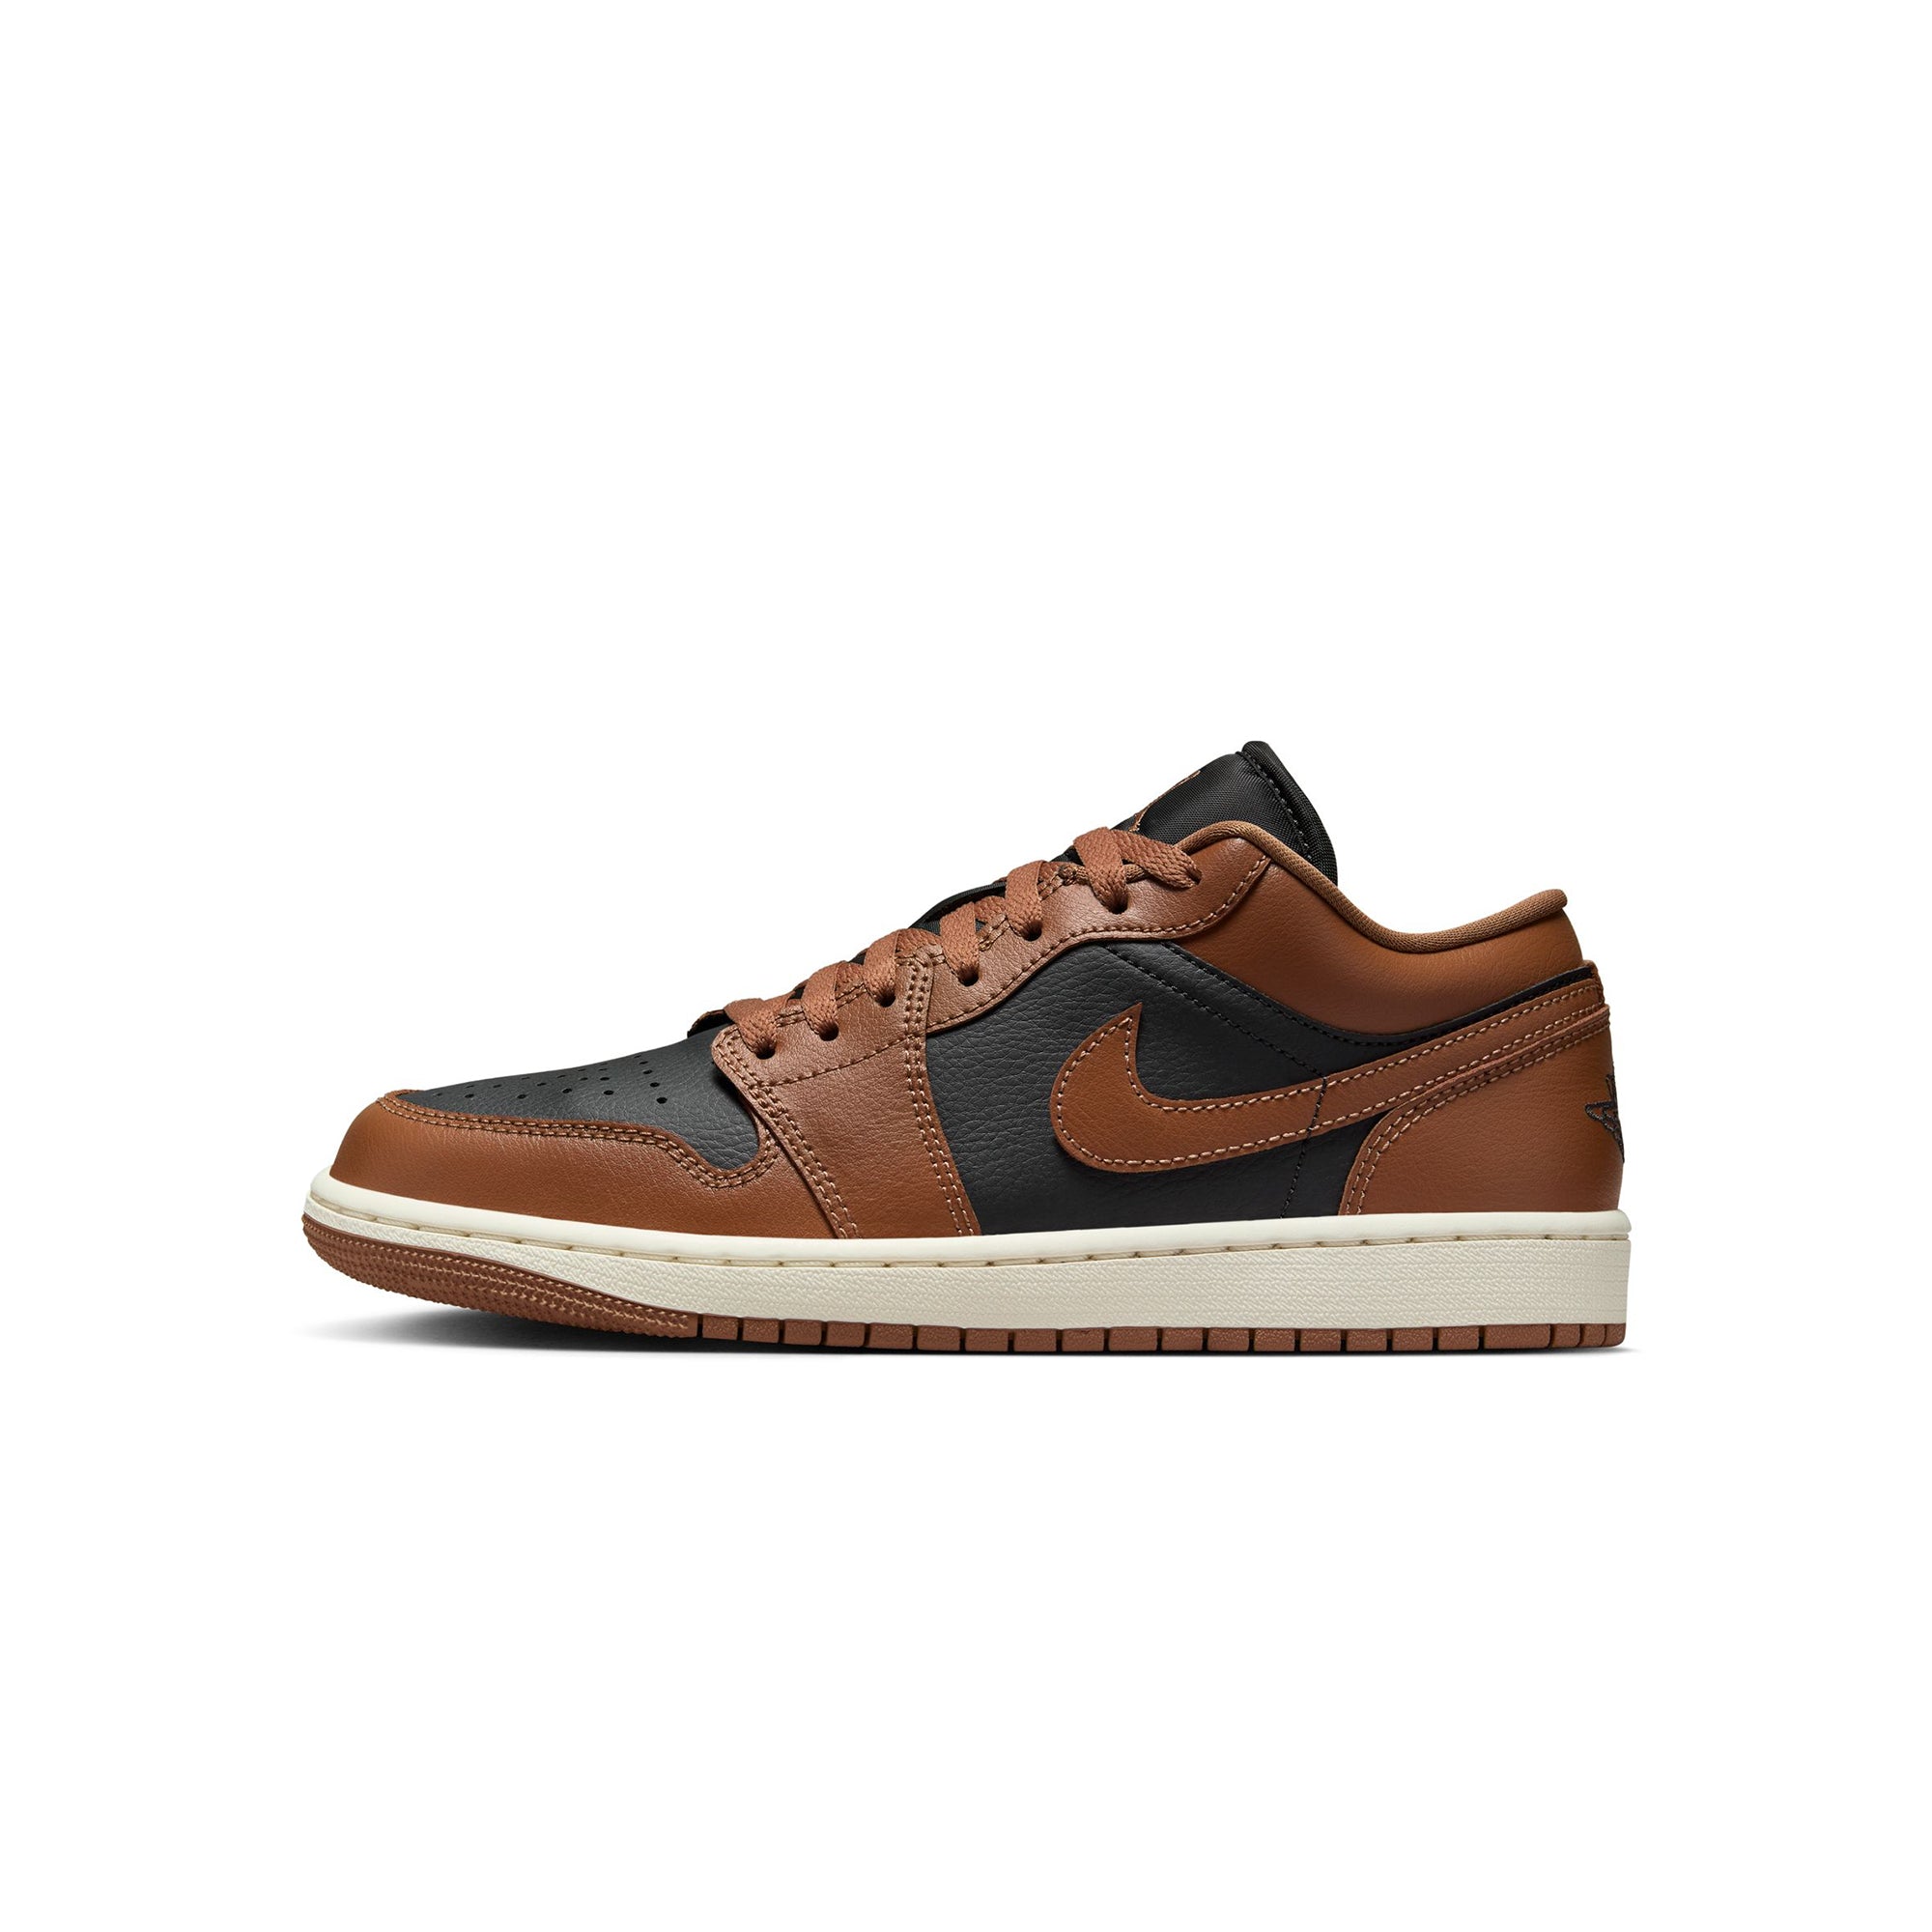 Air Jordan 1 Womens Low "Archaeo Brown" Shoes card image